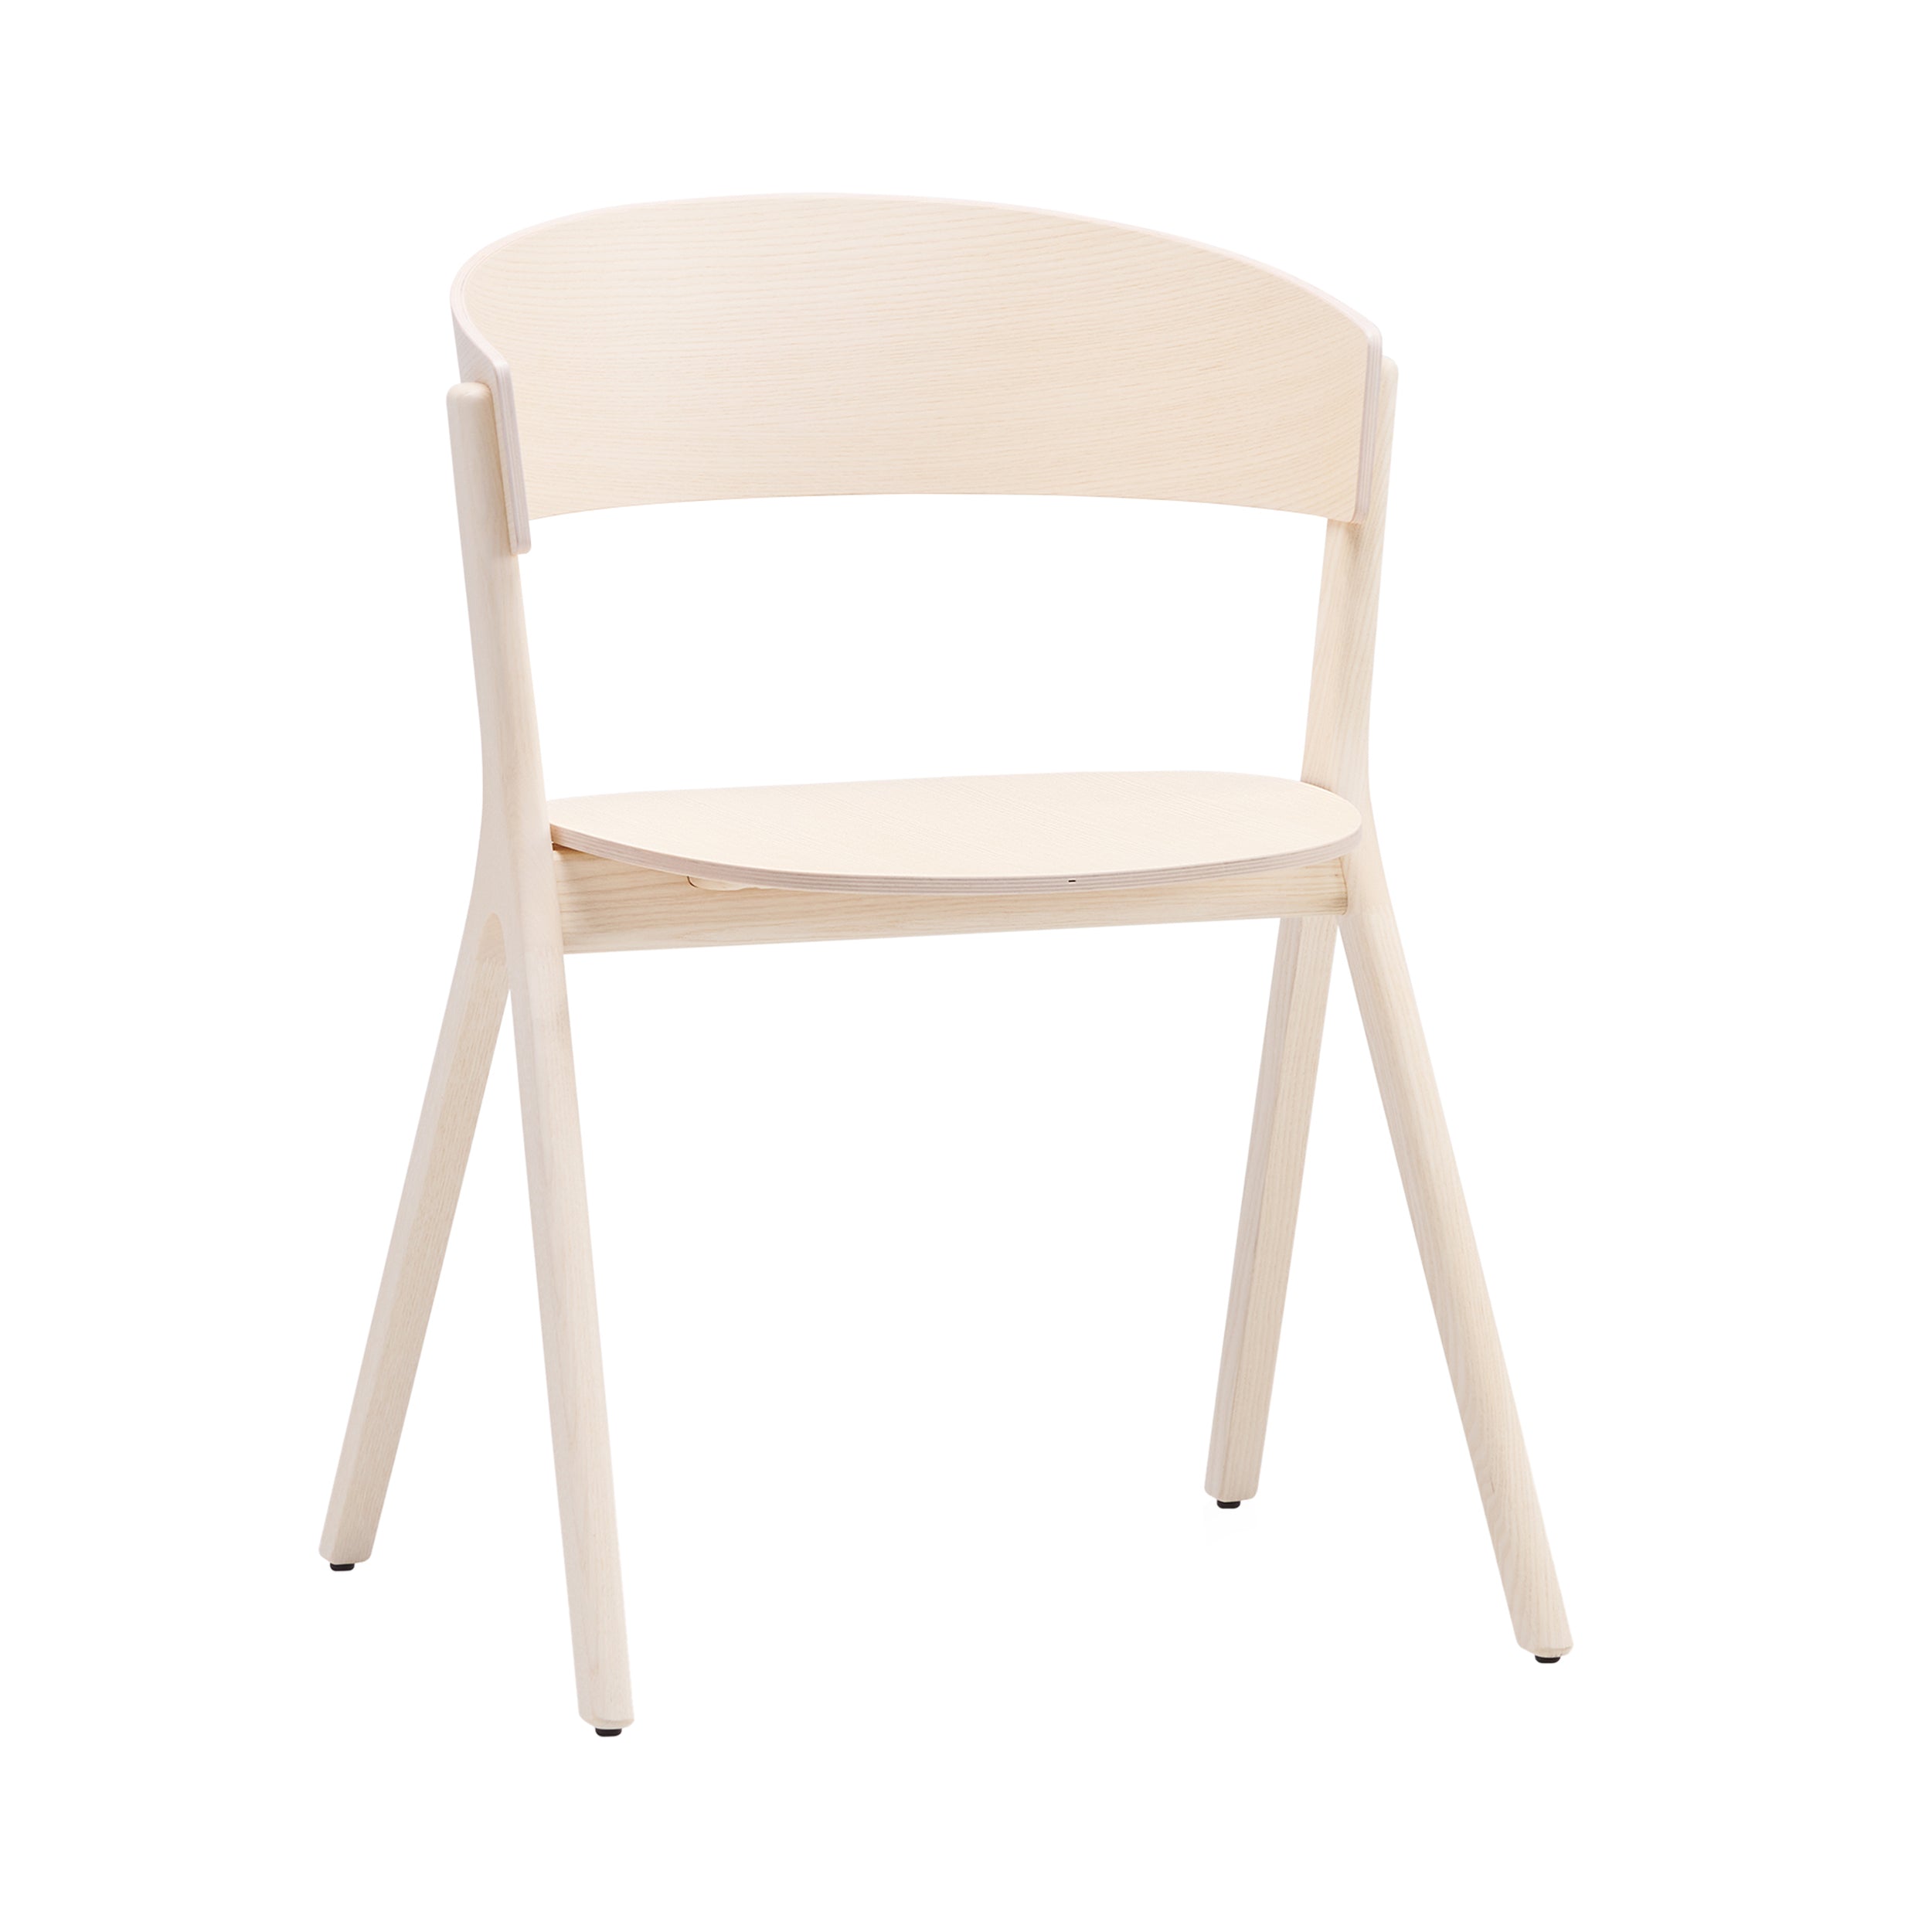 Circus Wood Chair: Natural Oak + Without Seat Pad